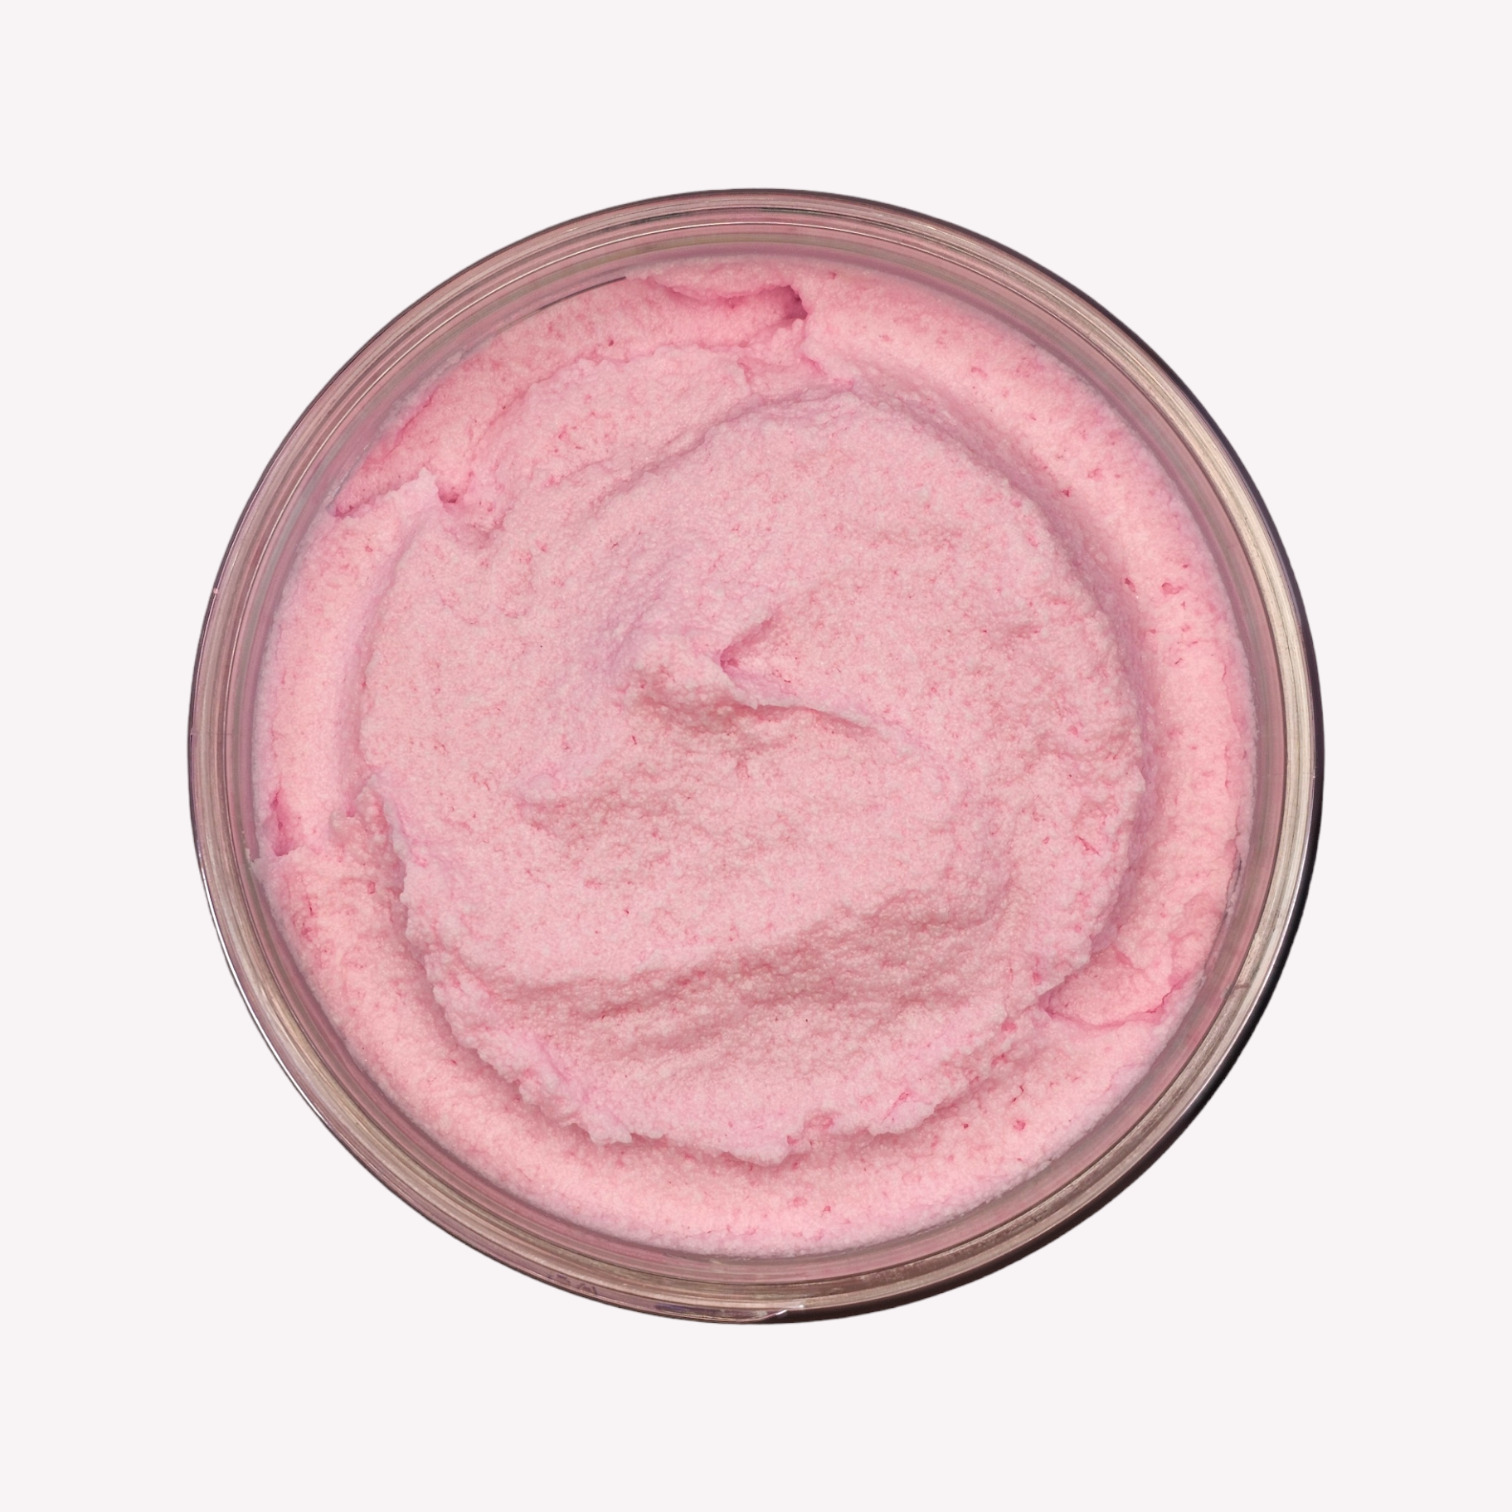 White Citrus Strawberry Whipped Soap